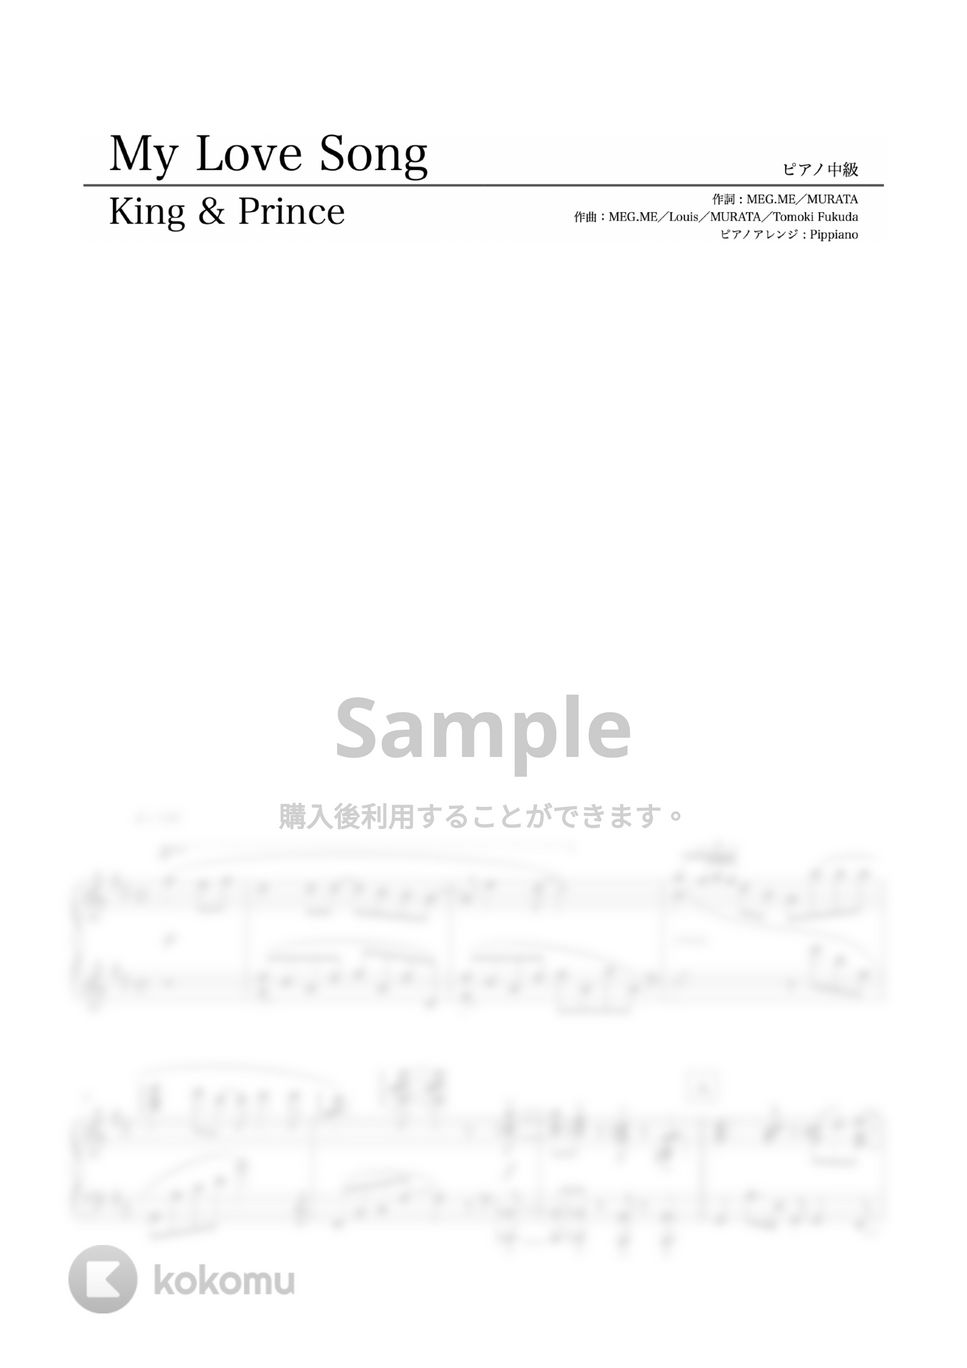 King & Prince - My Love Song by Pippiano